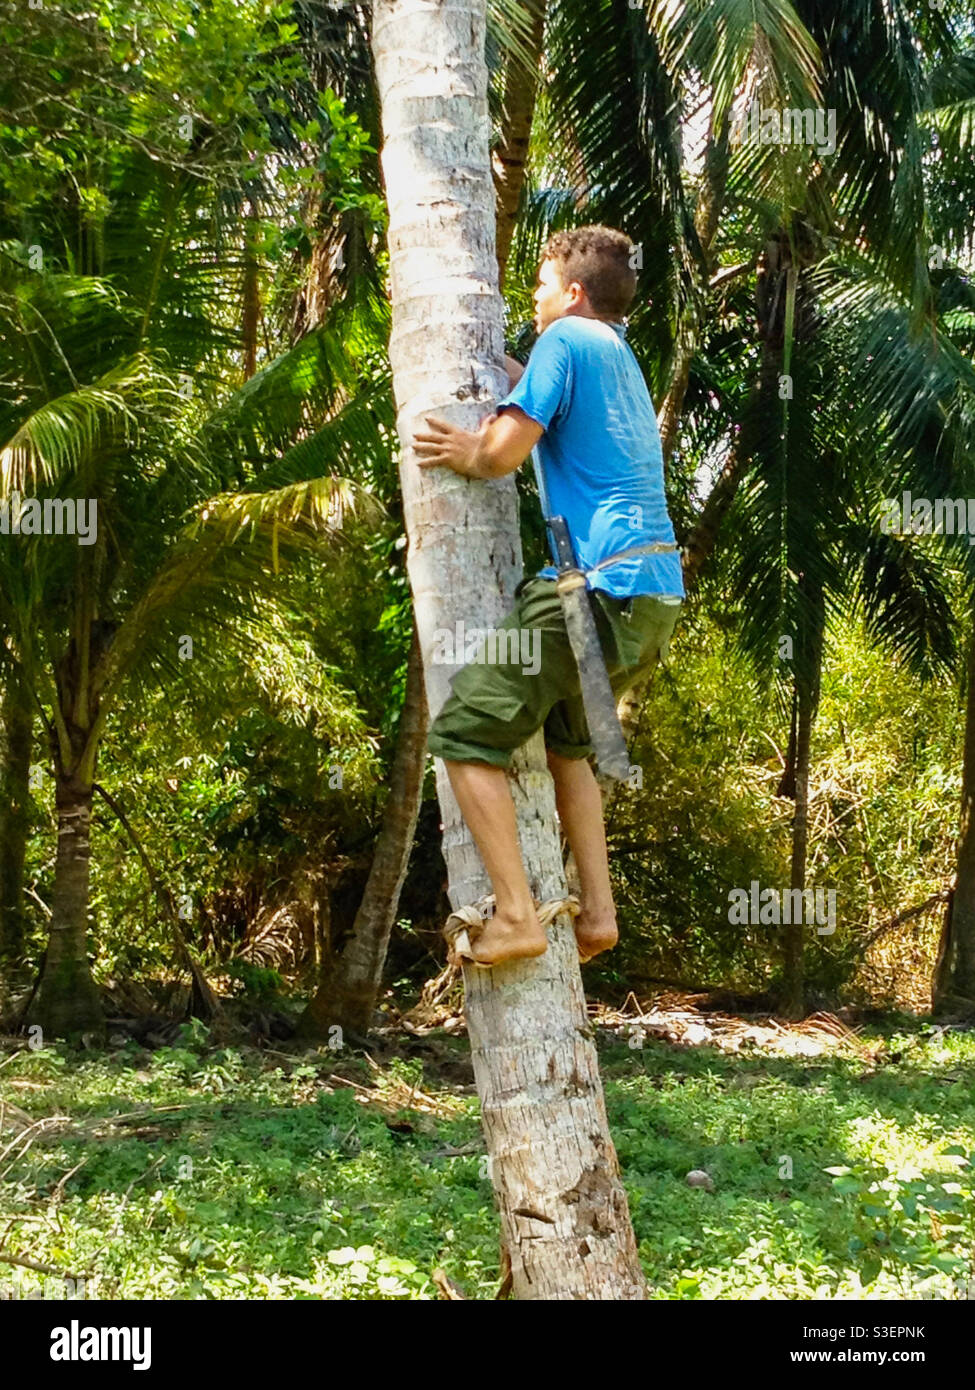 Young boy climbing coconut tree barefoot with strap and machete to cut down coconuts in jungle in Alexander Humboldt national park, Cuba Stock Photo